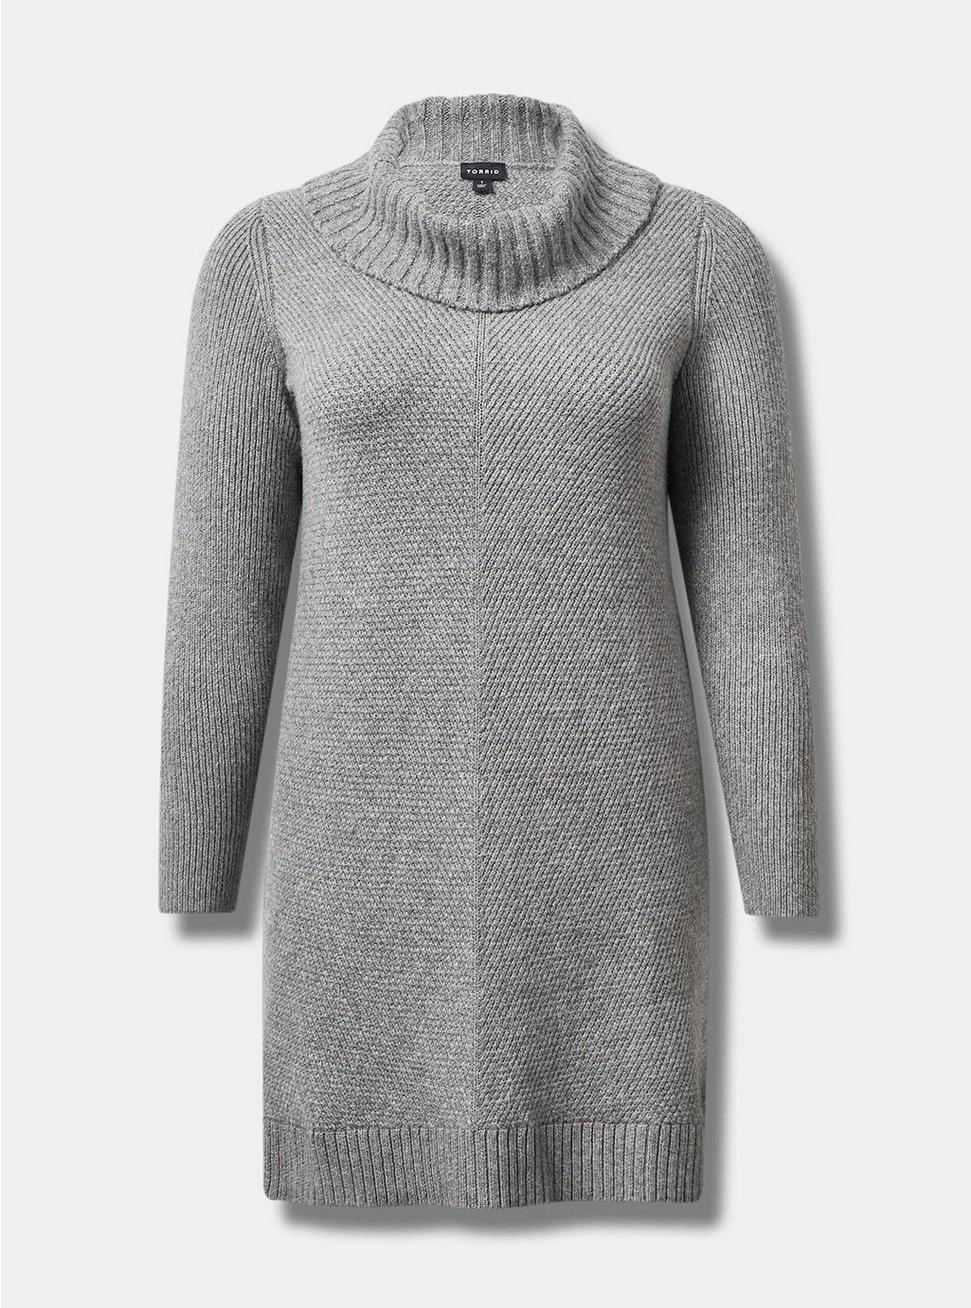 At The Knee Sweater Cowl Neck Dress, HEATHER GREY, hi-res